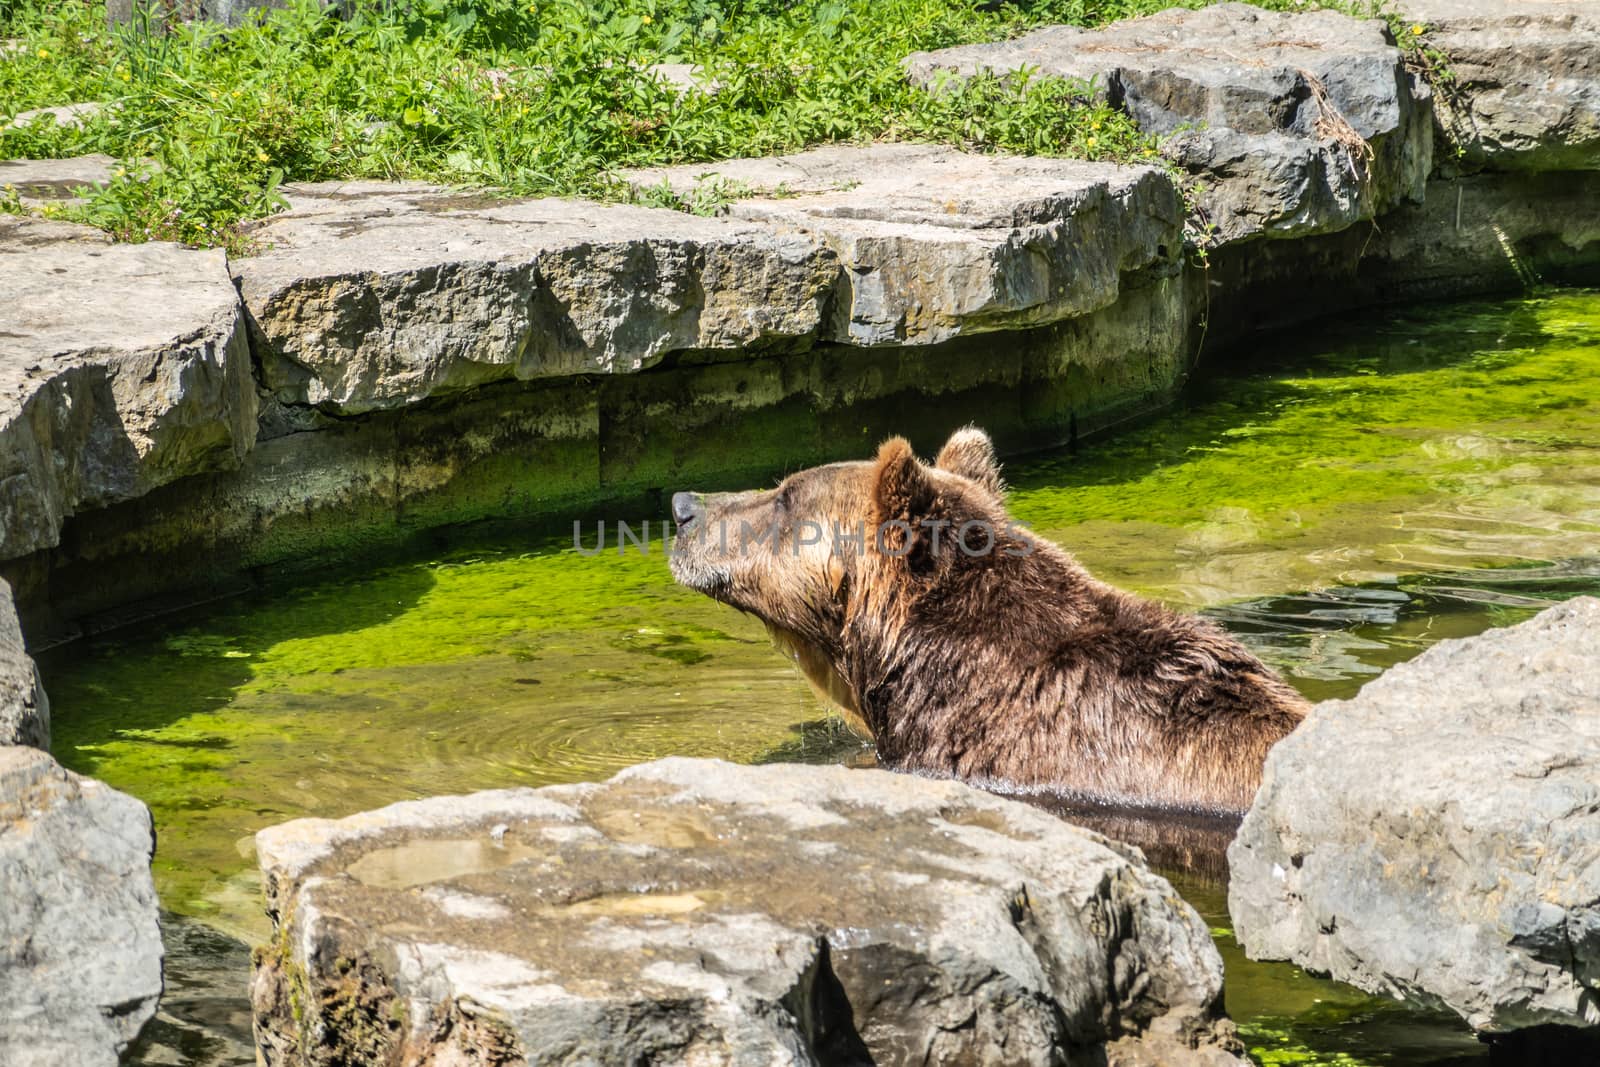 Han-sur-Lesse, Belgium - June 25, 2019: Animal park with brown bear in greenish pool water surrounded by rocks popping its head above water.